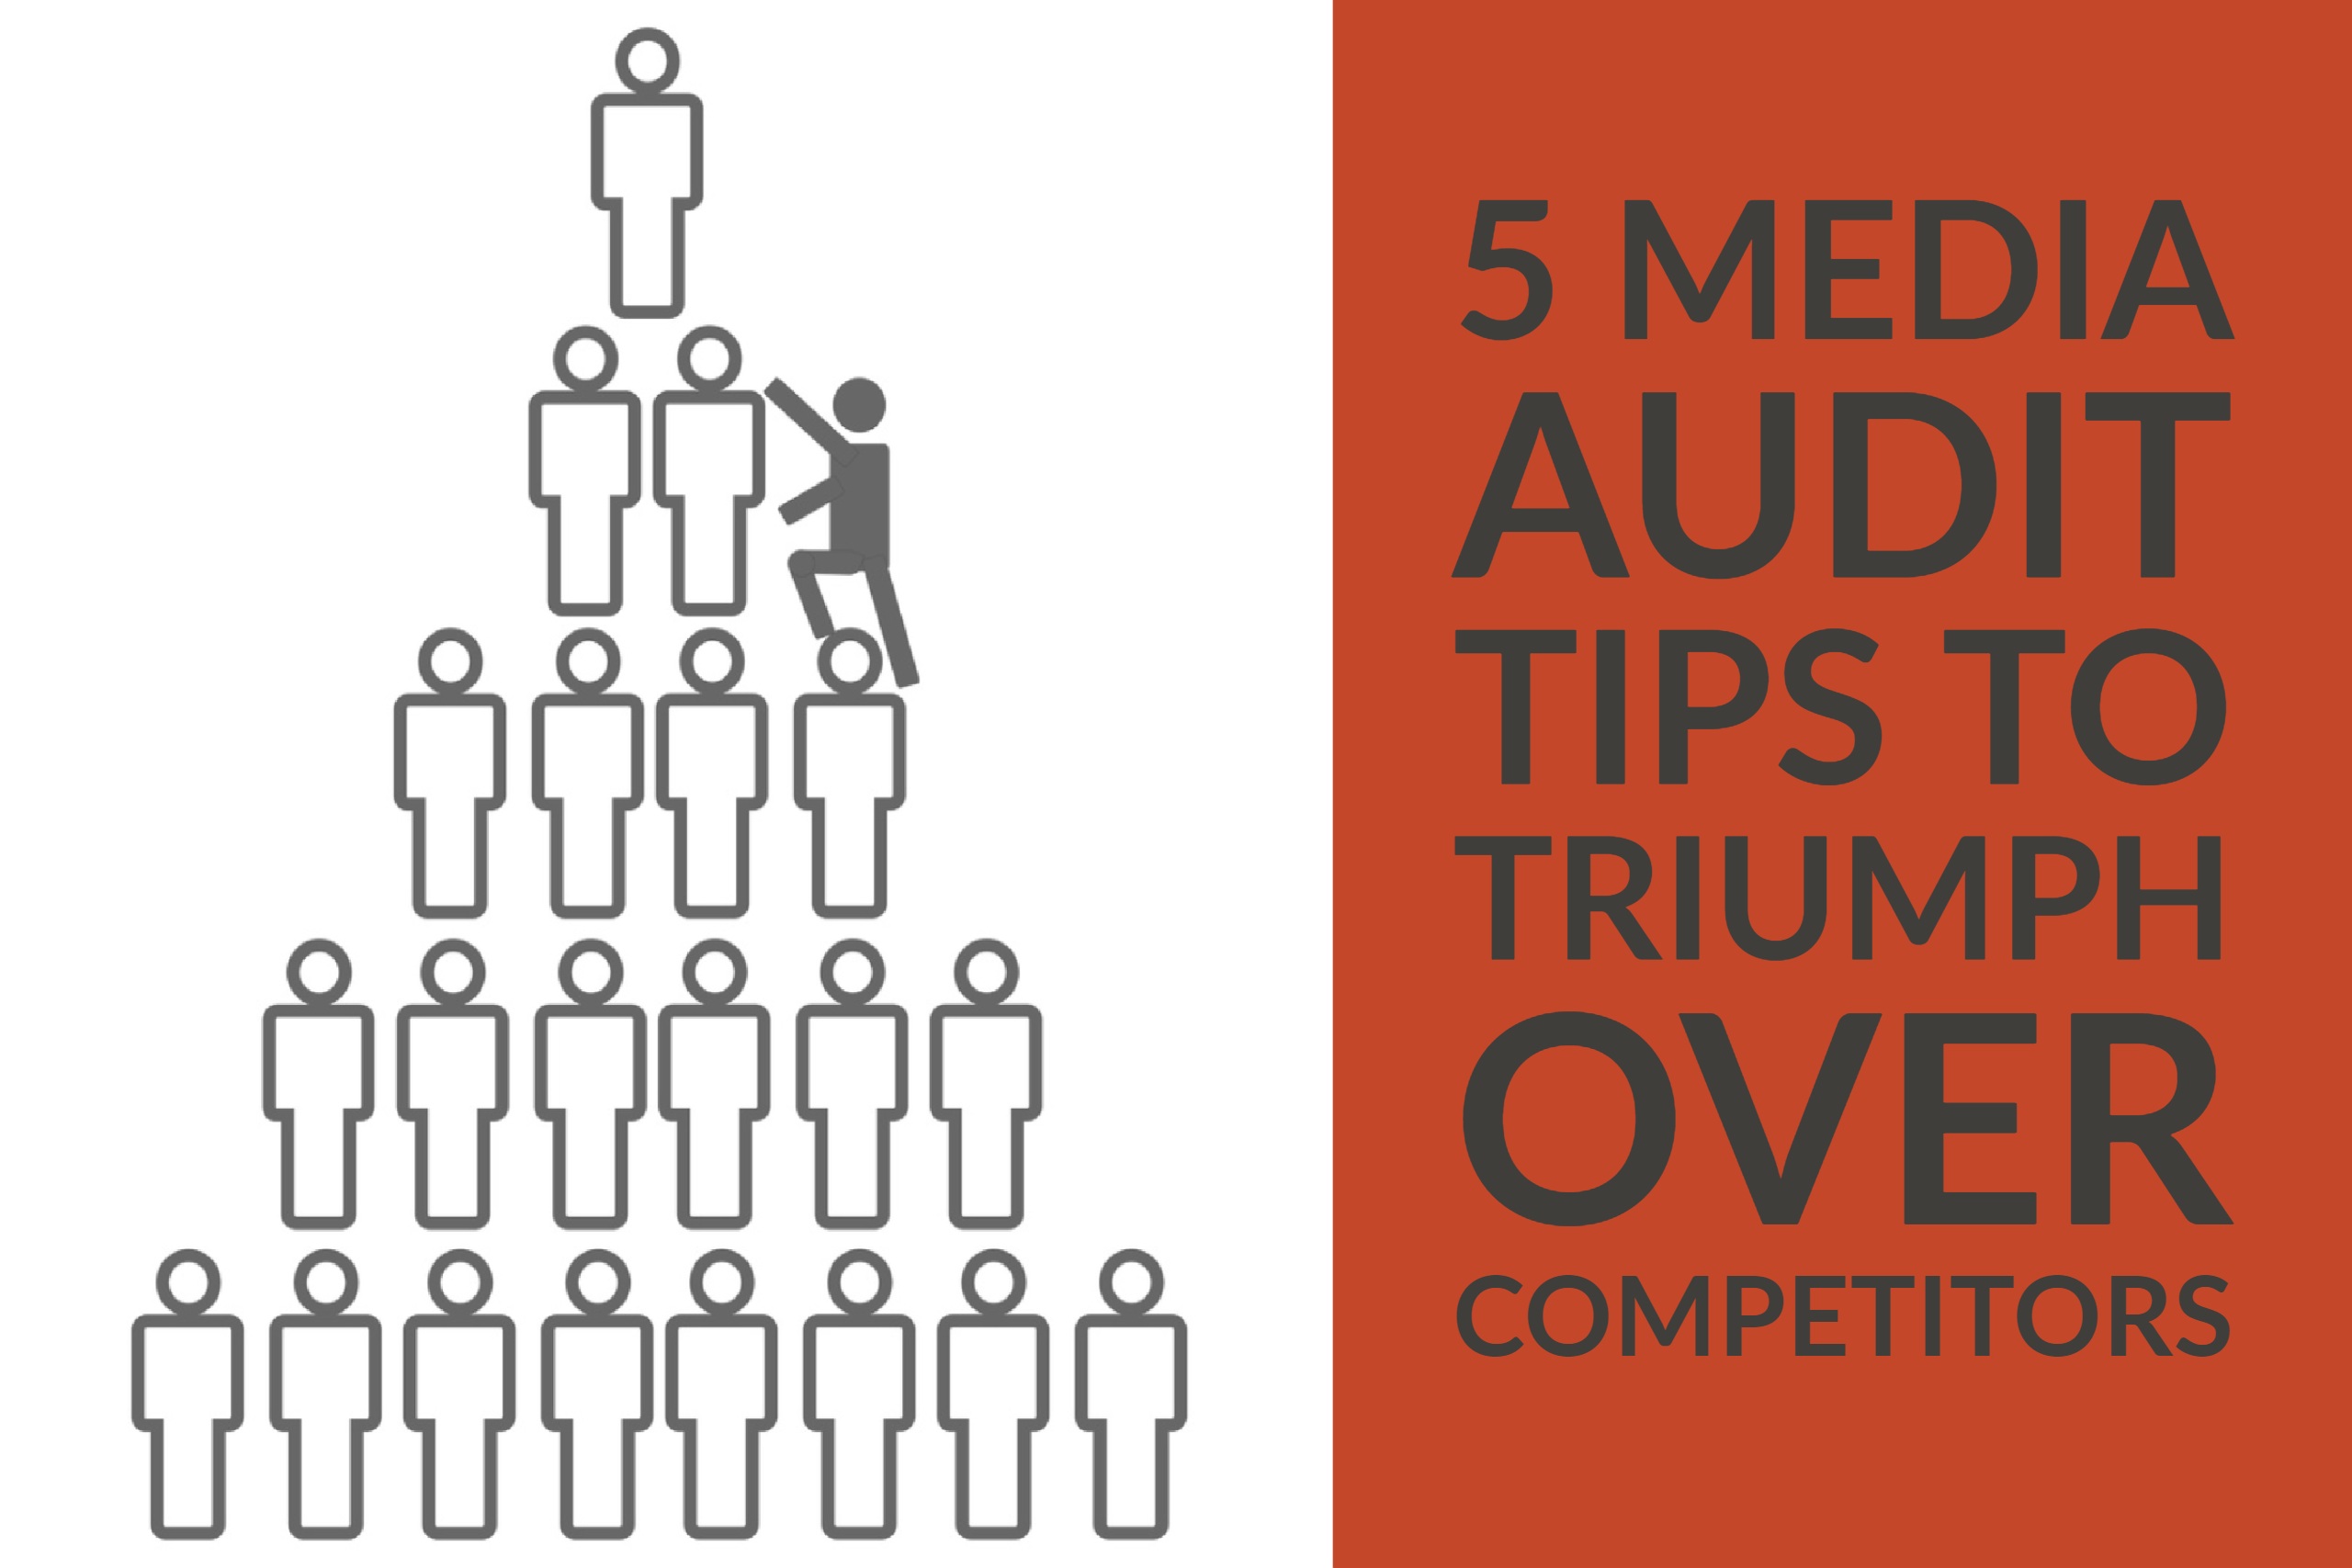 How Conducting a Media Audit Can Help You Triumph Over Competitors